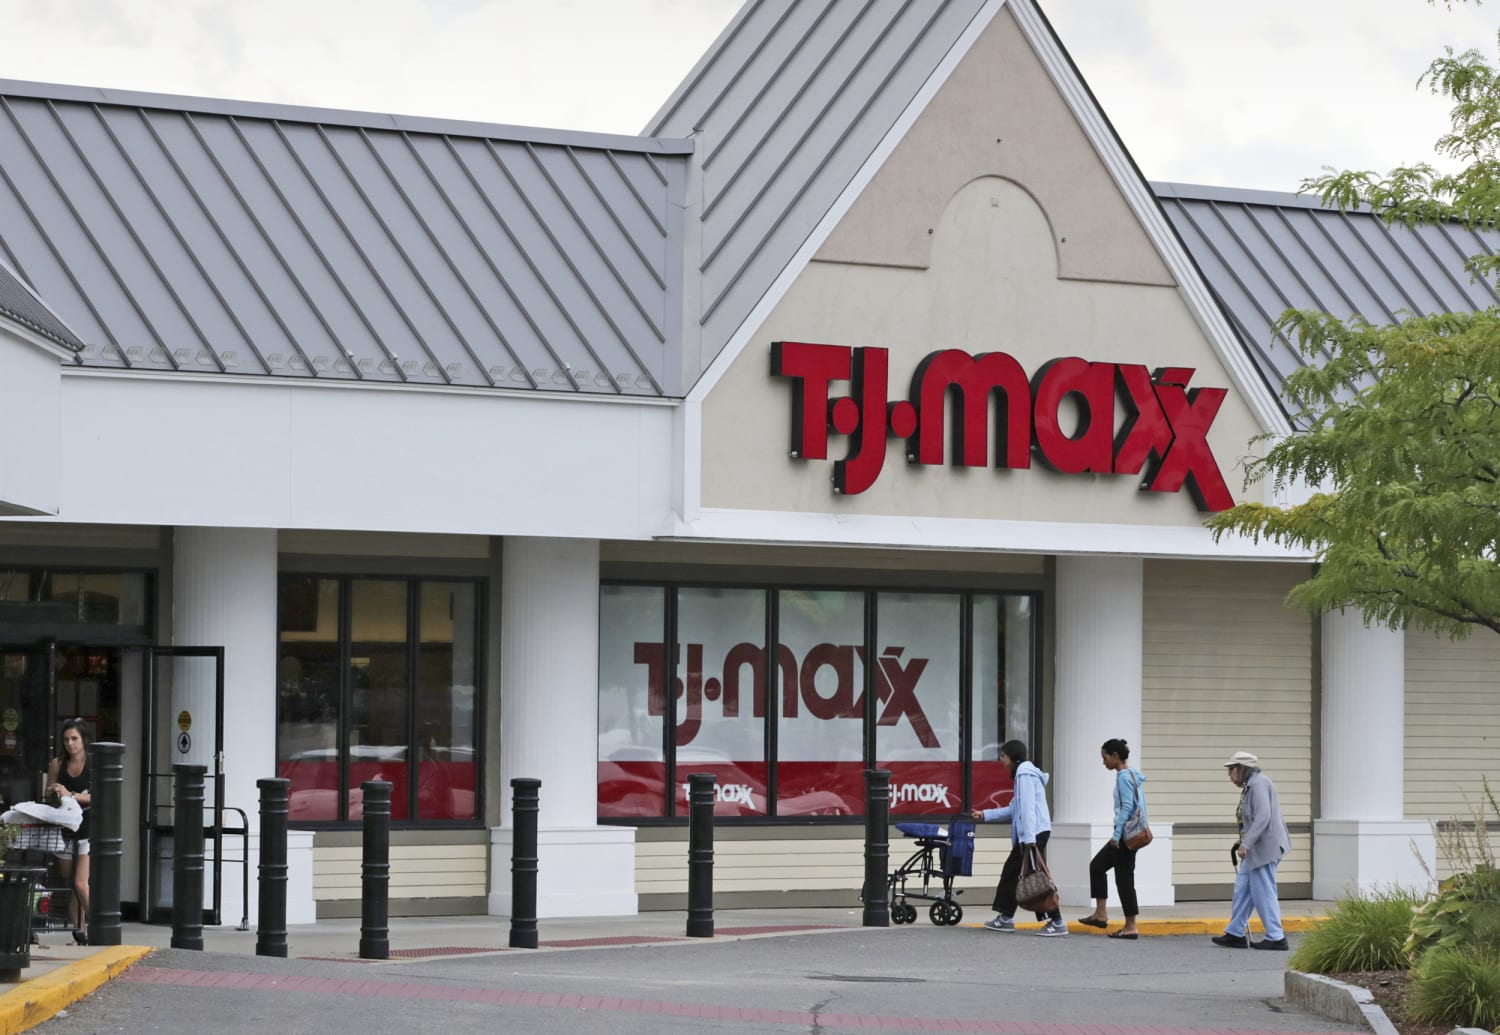 T.J. Maxx, Marshalls, HomeGoods parent company fined for selling recalled  baby items - ABC 6 News 